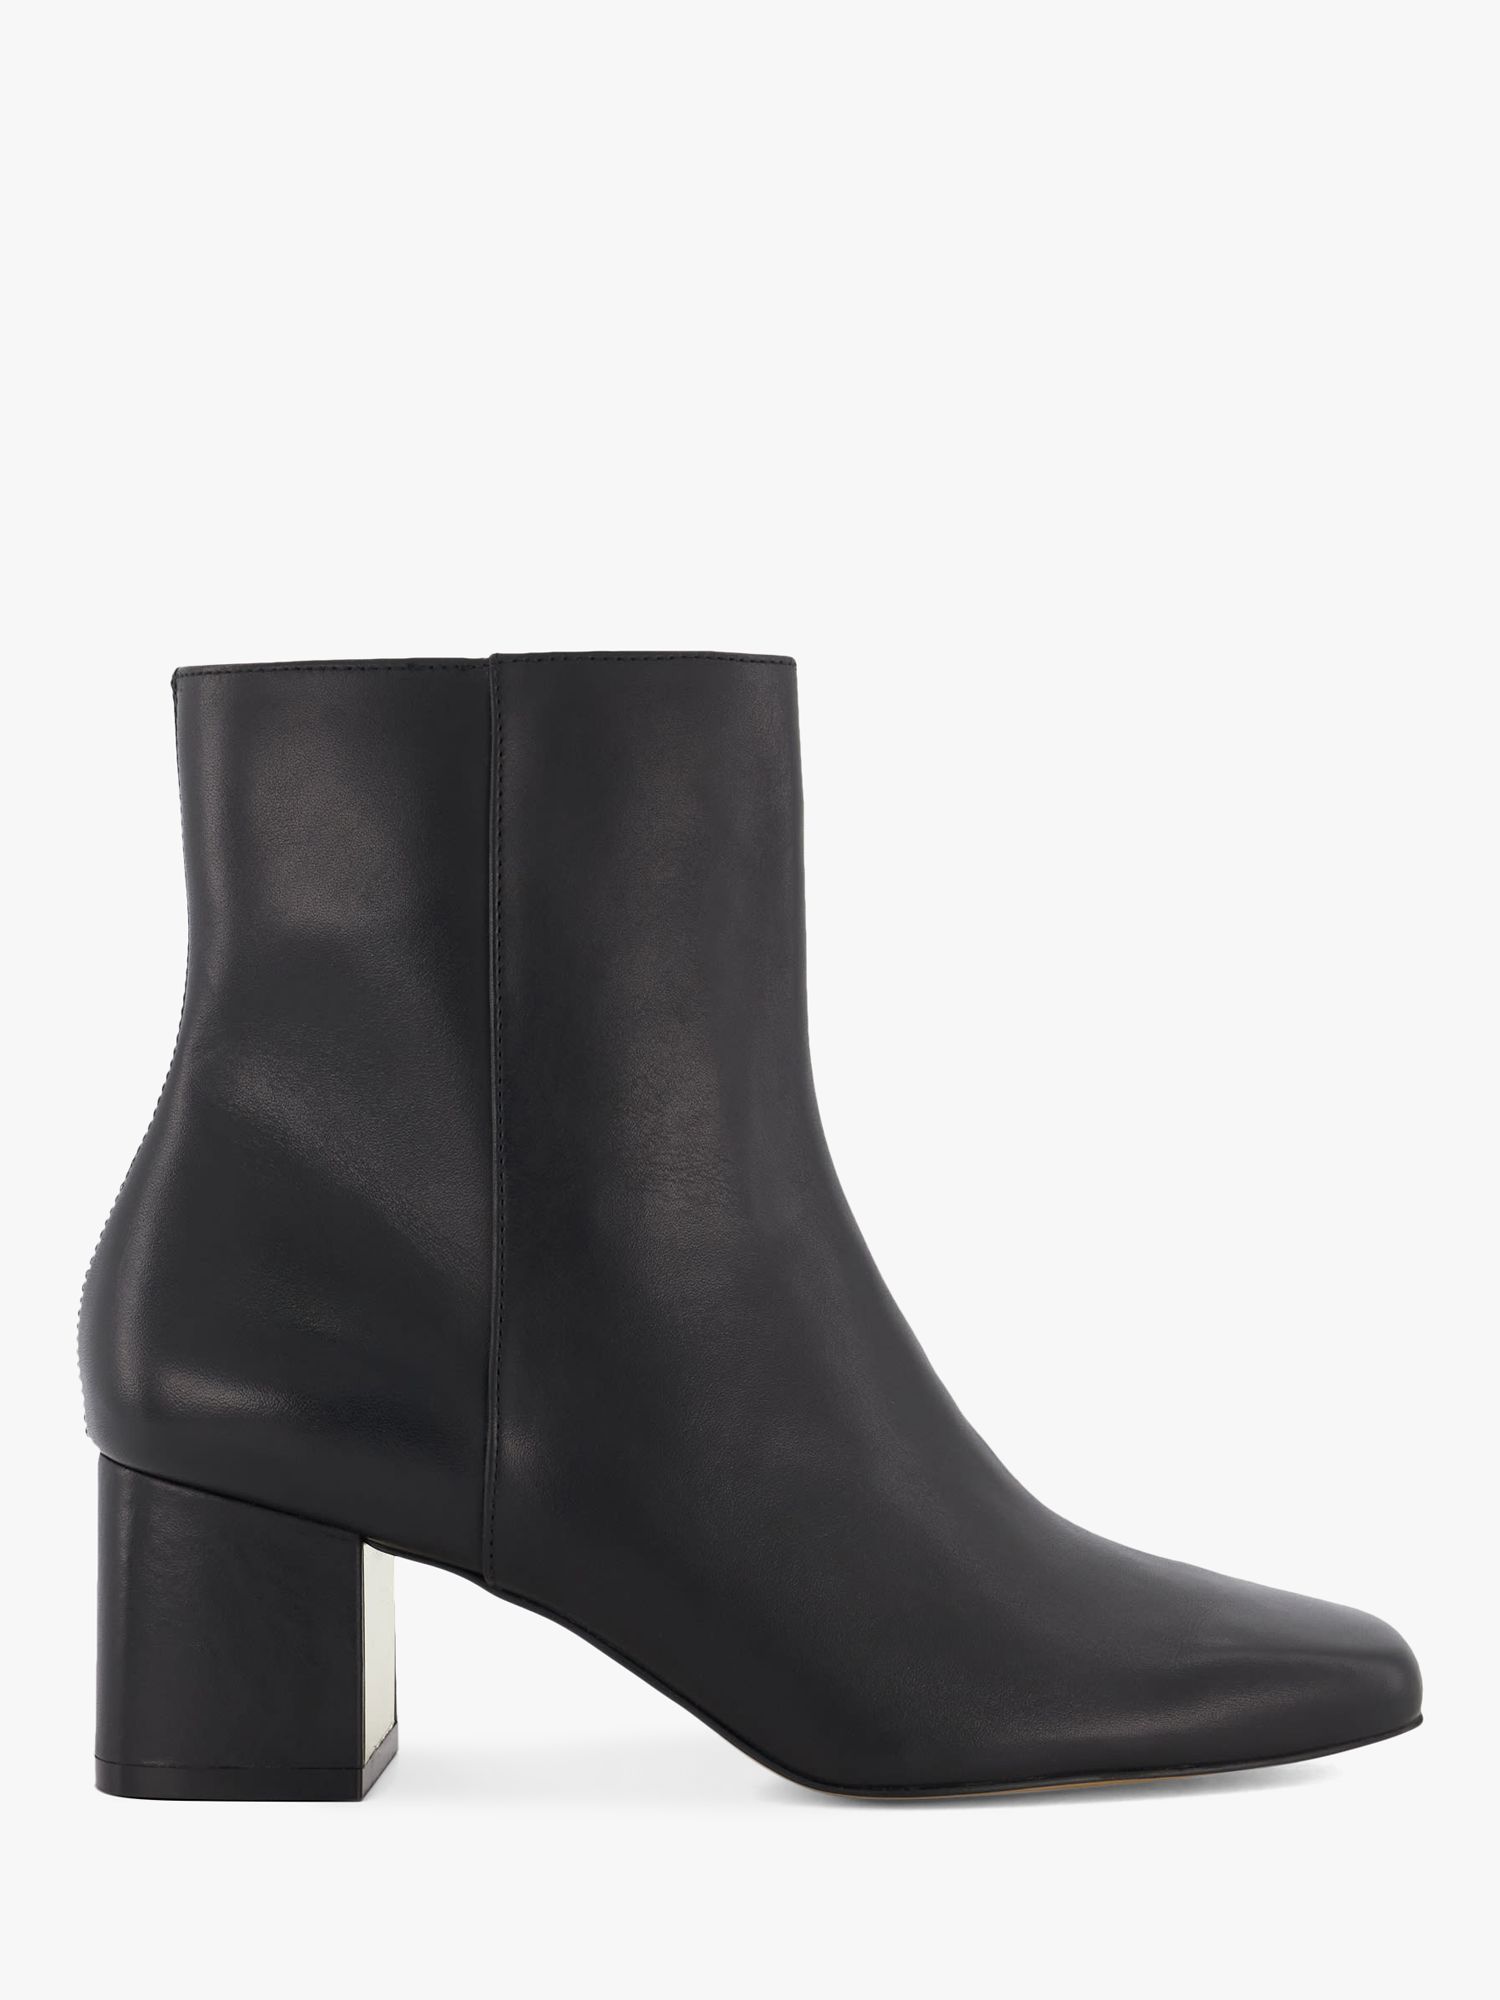 Dune Onsen Leather Ankle Boots, Black